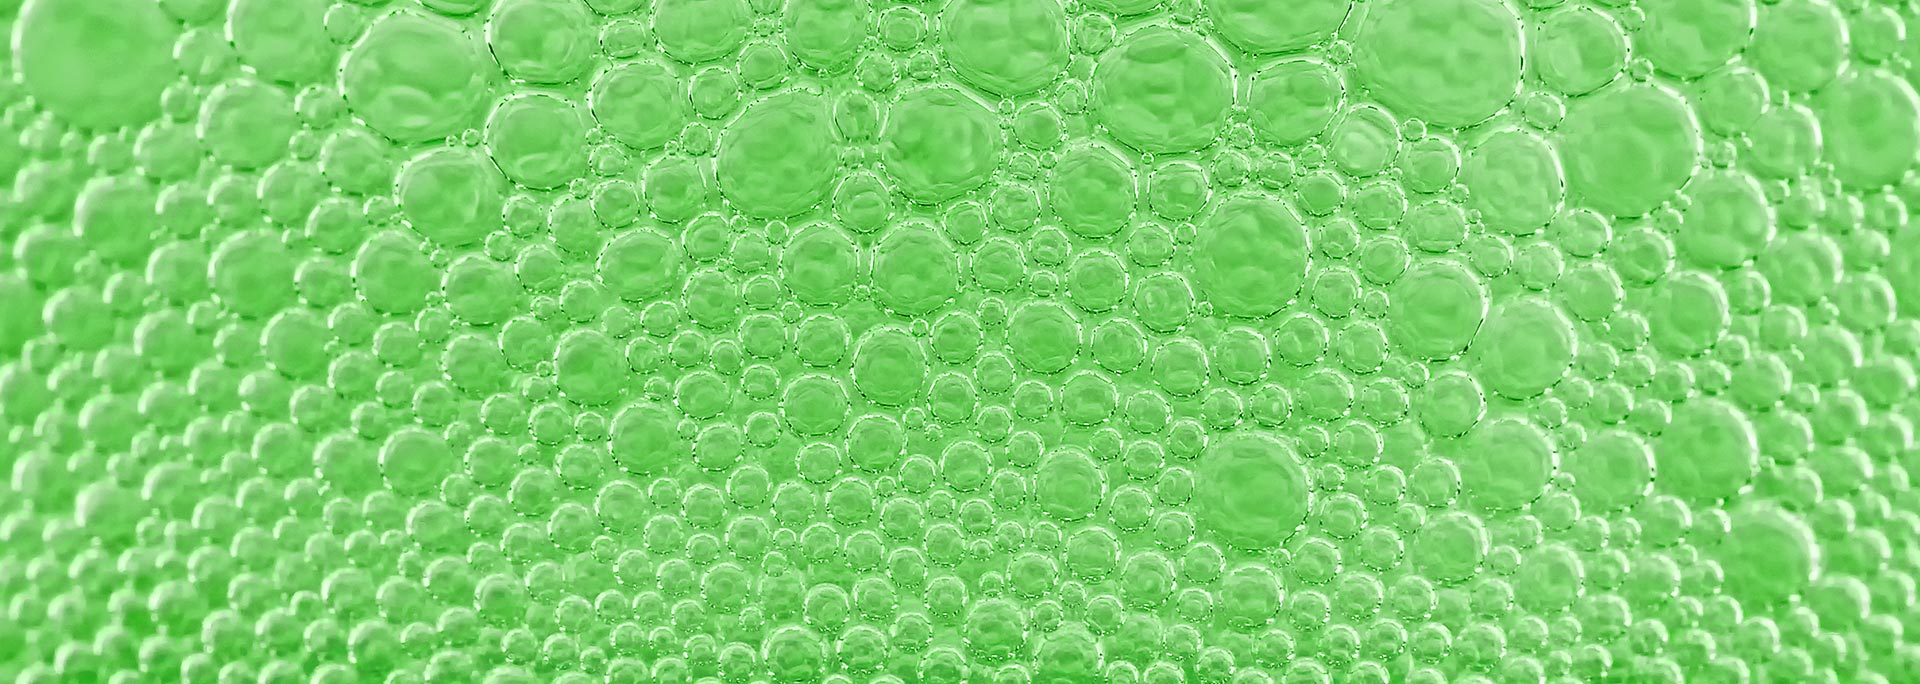 Background graphic. Green water bubbles.